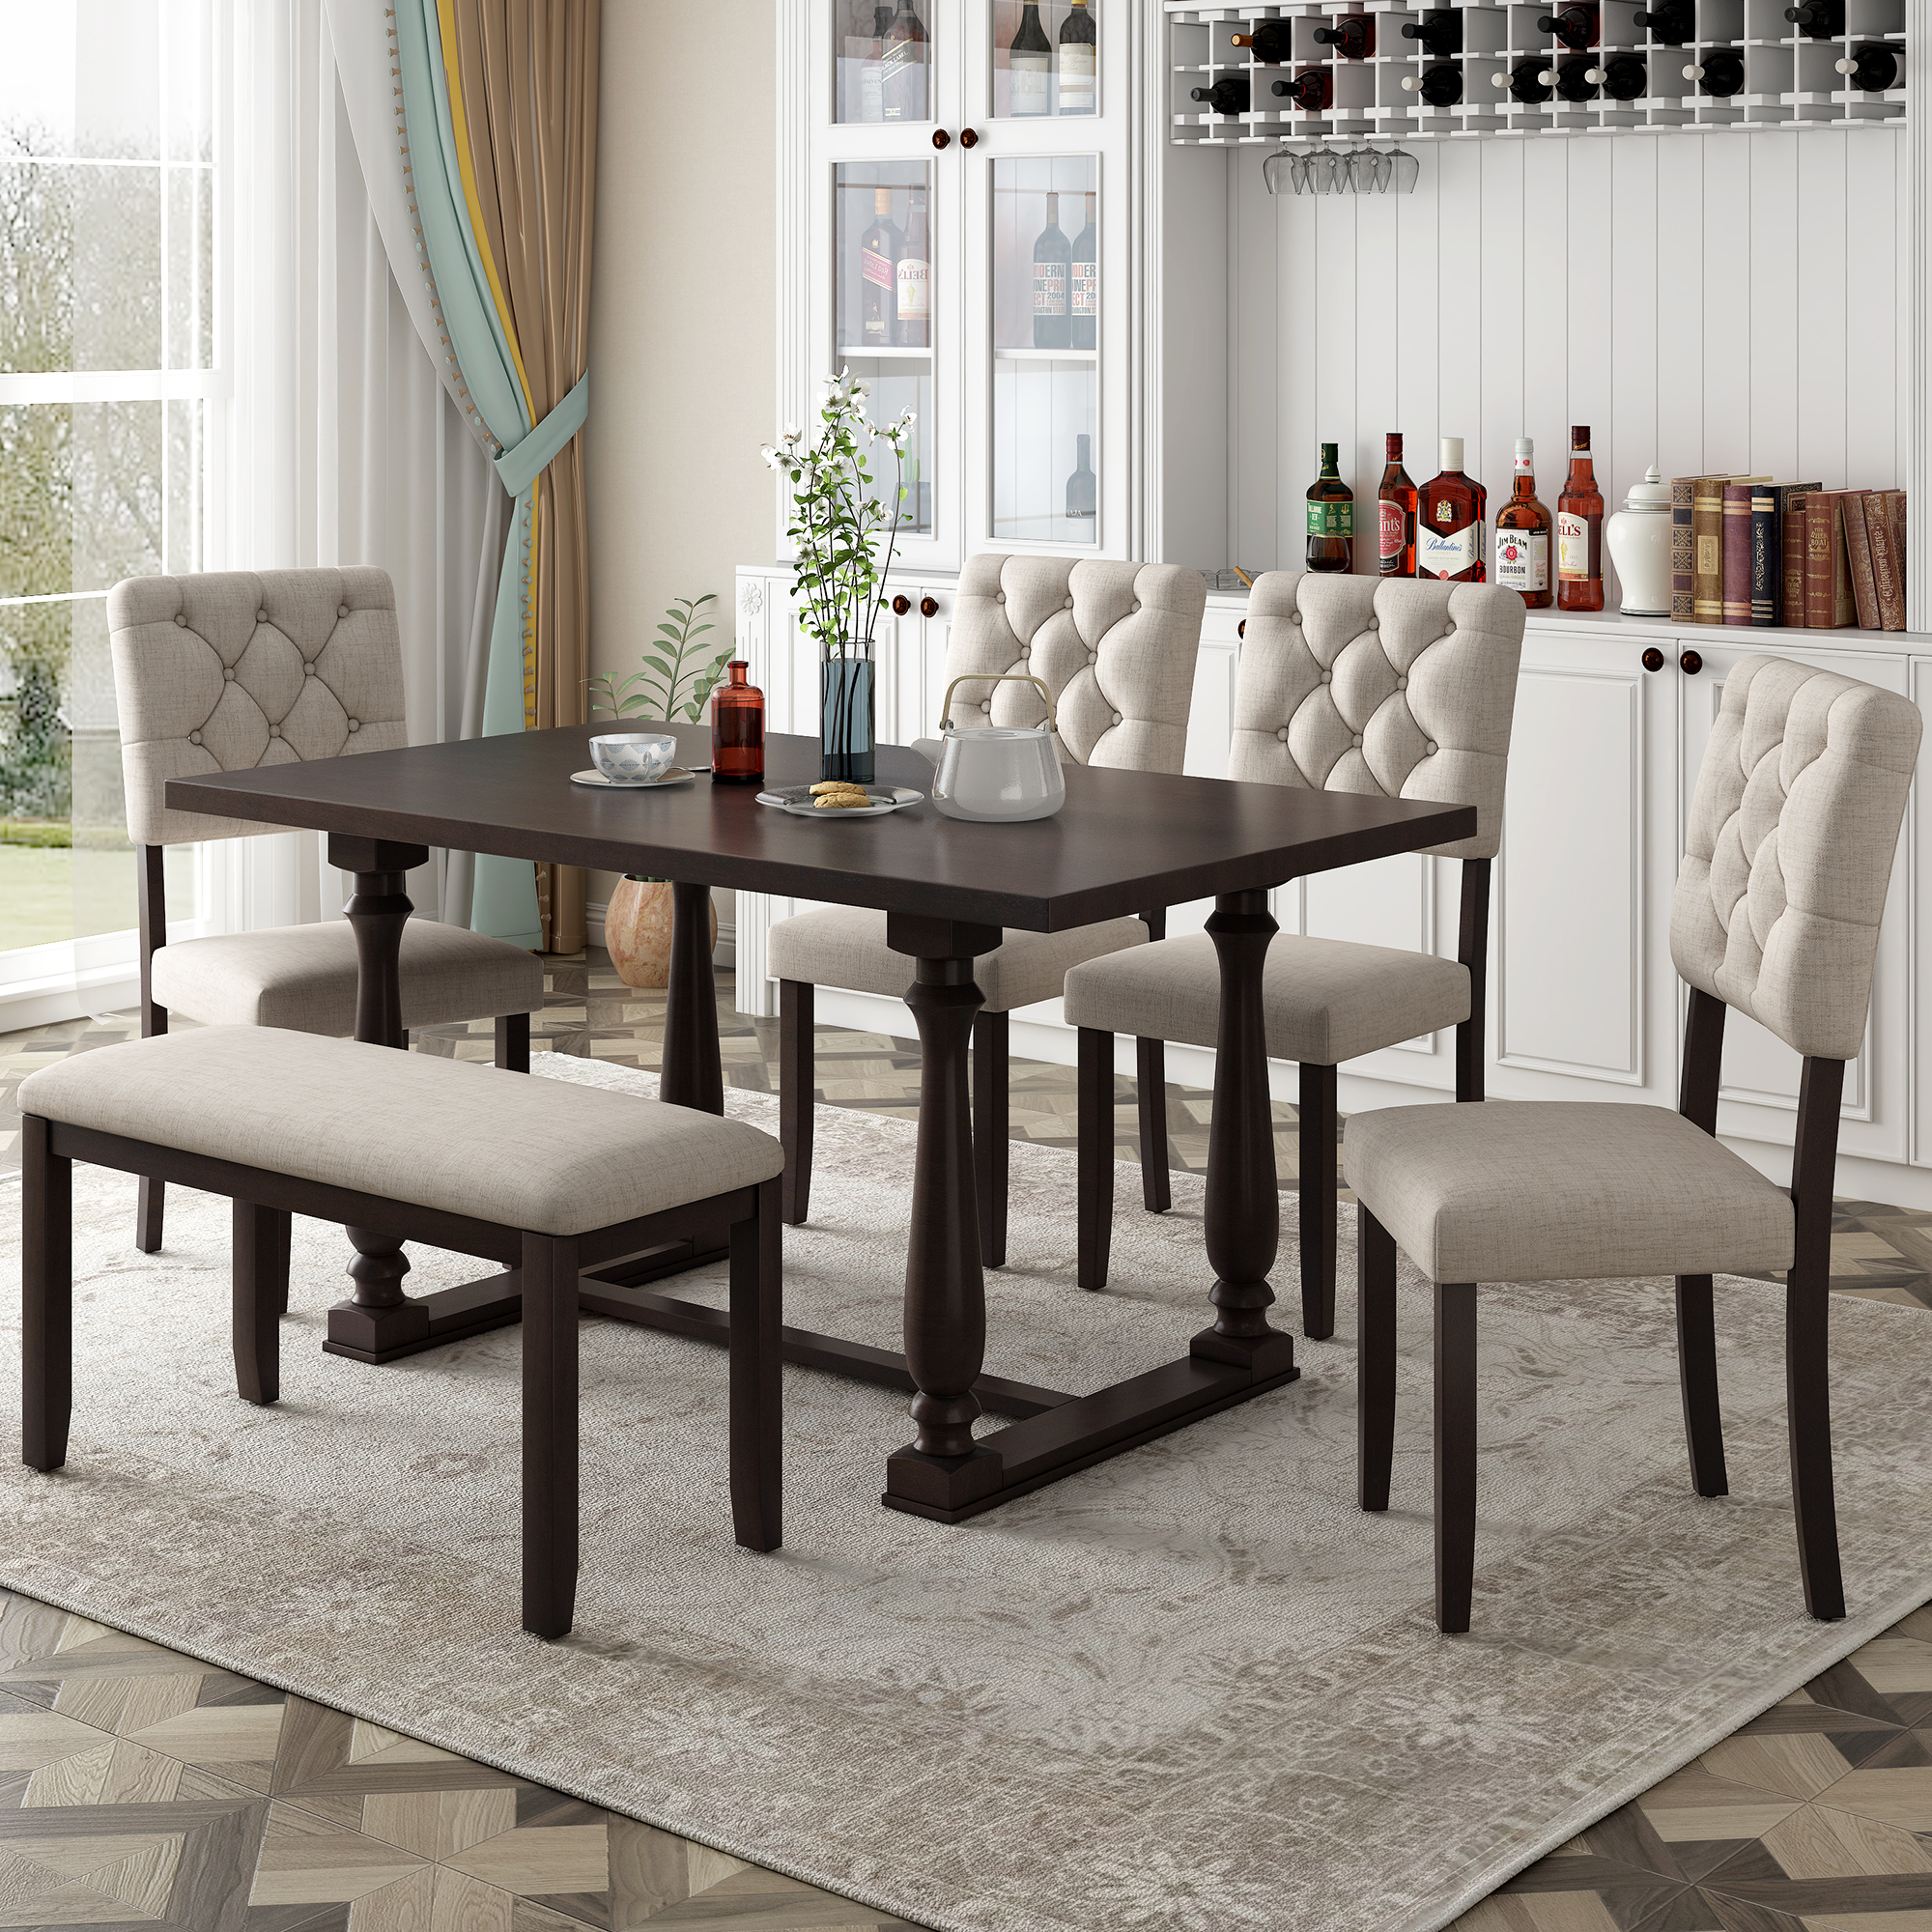 6-Piece Dining Table And Chair Set - ST000059AAP